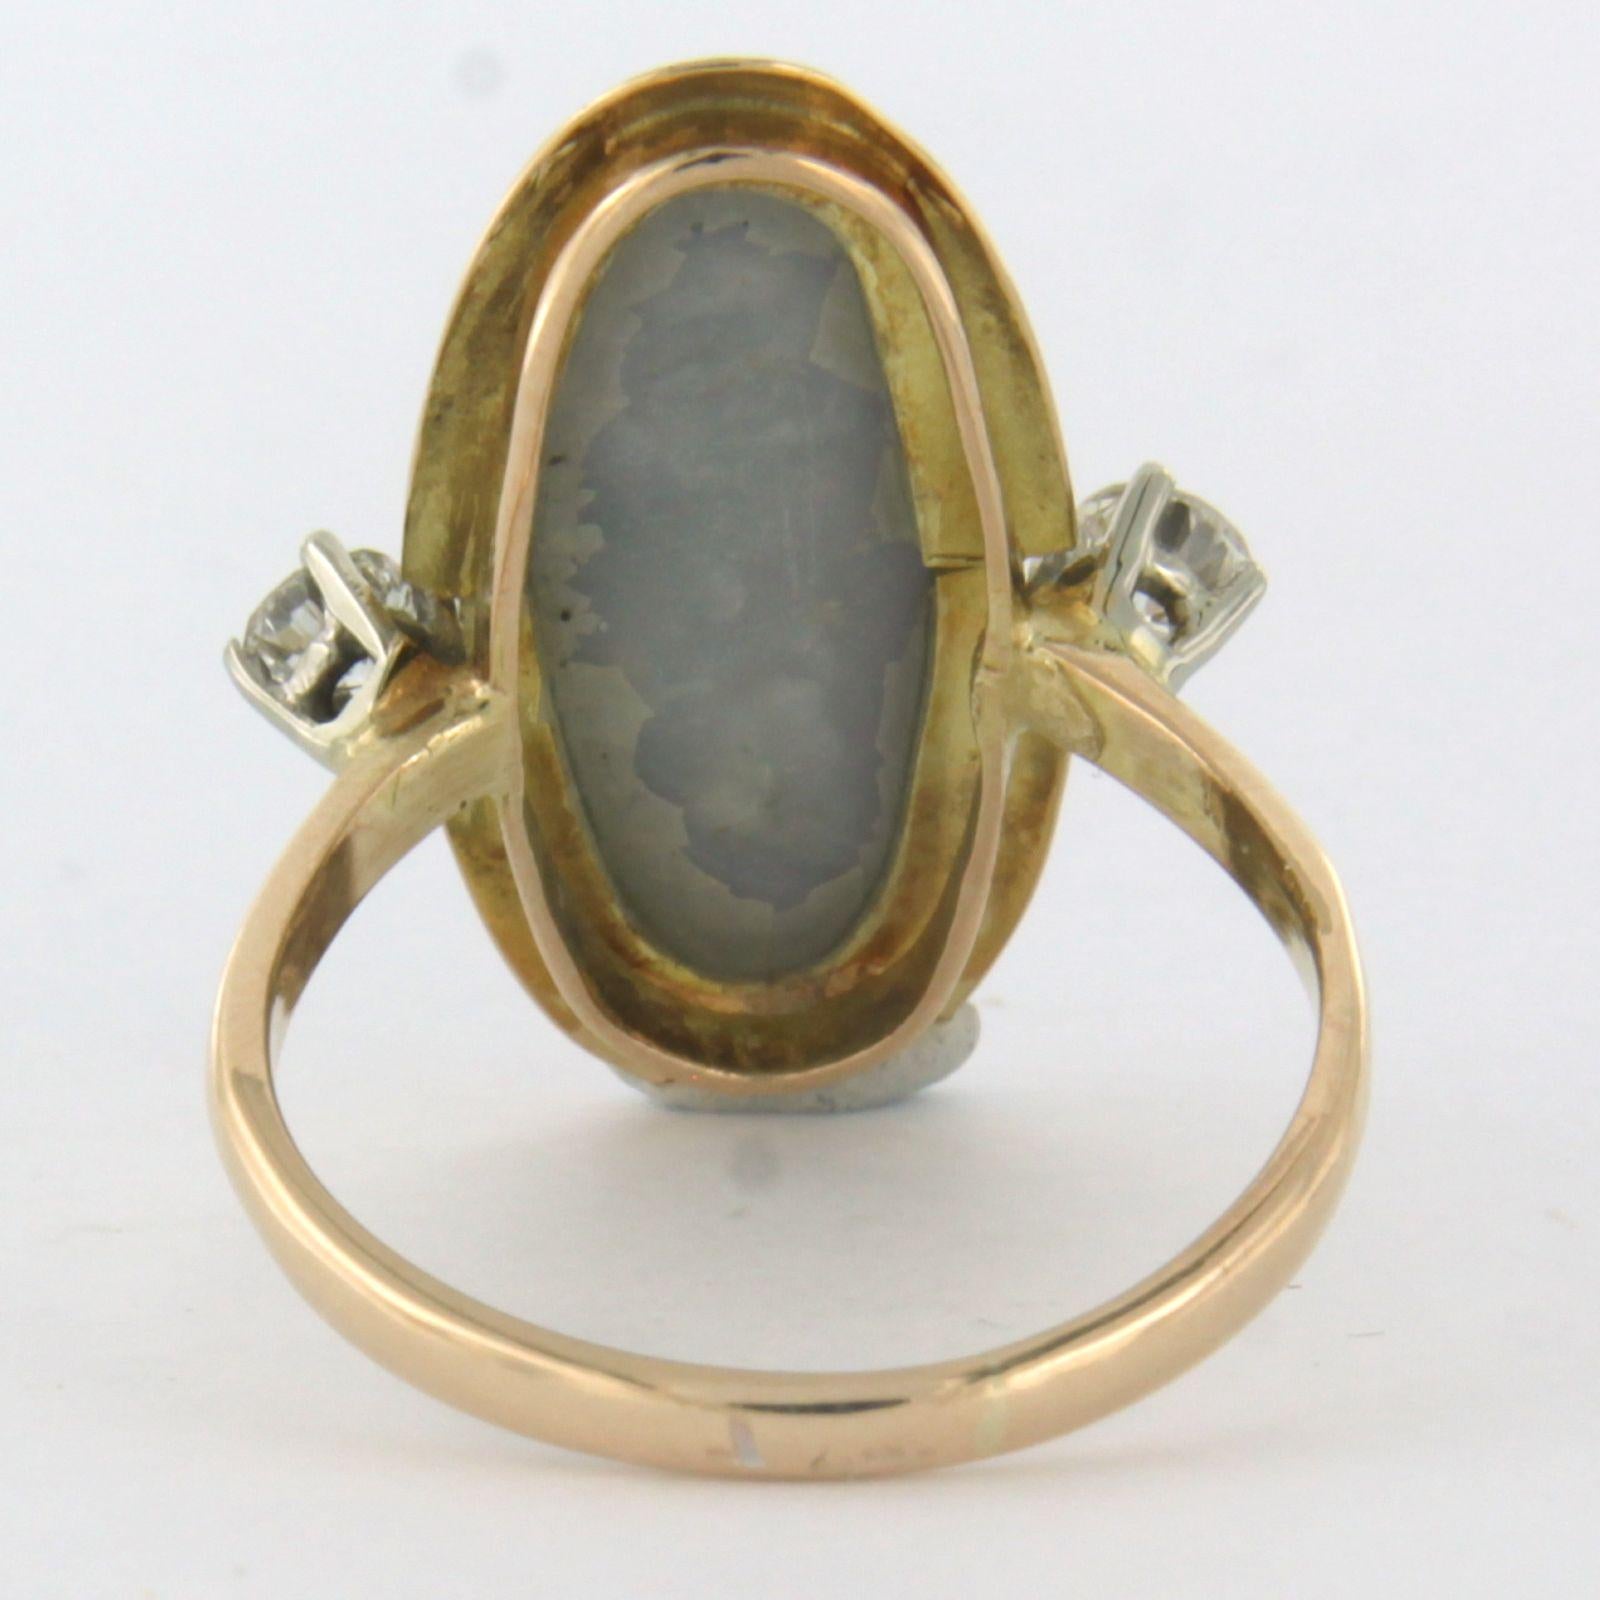 Brilliant Cut Ring with opal and diamond 14k yellow gold